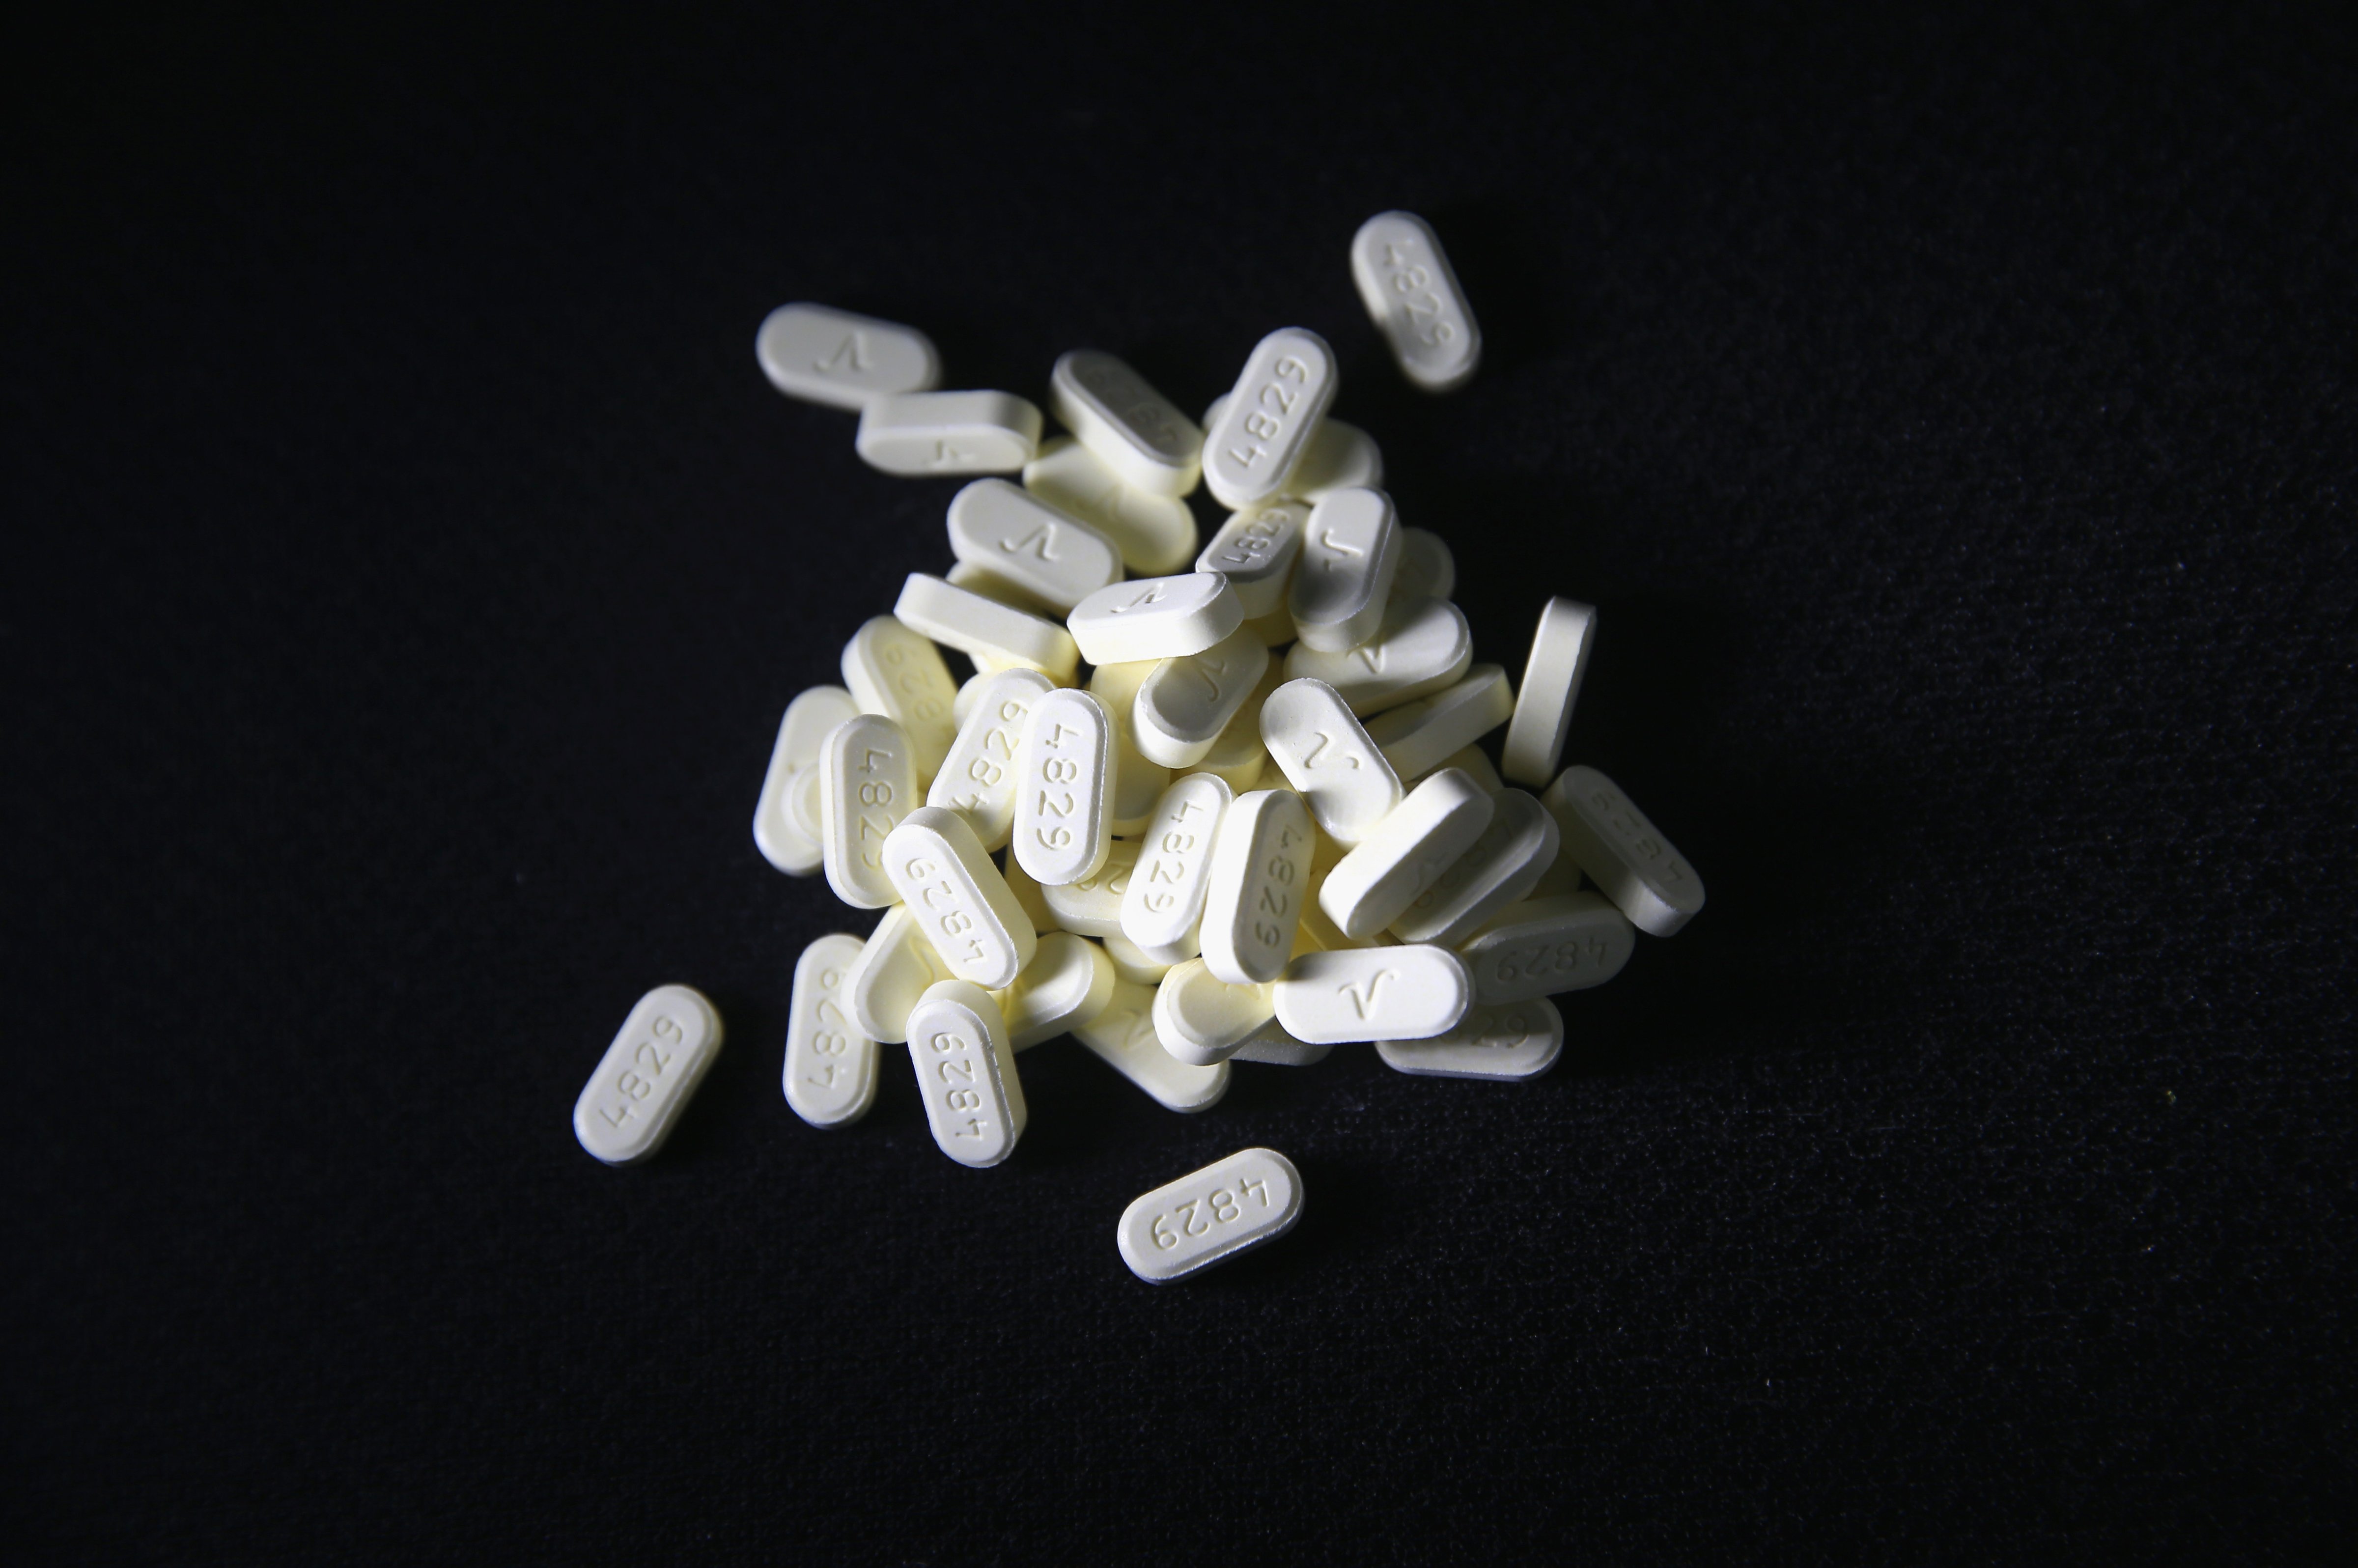 Pills of Oxycodone, an opioid